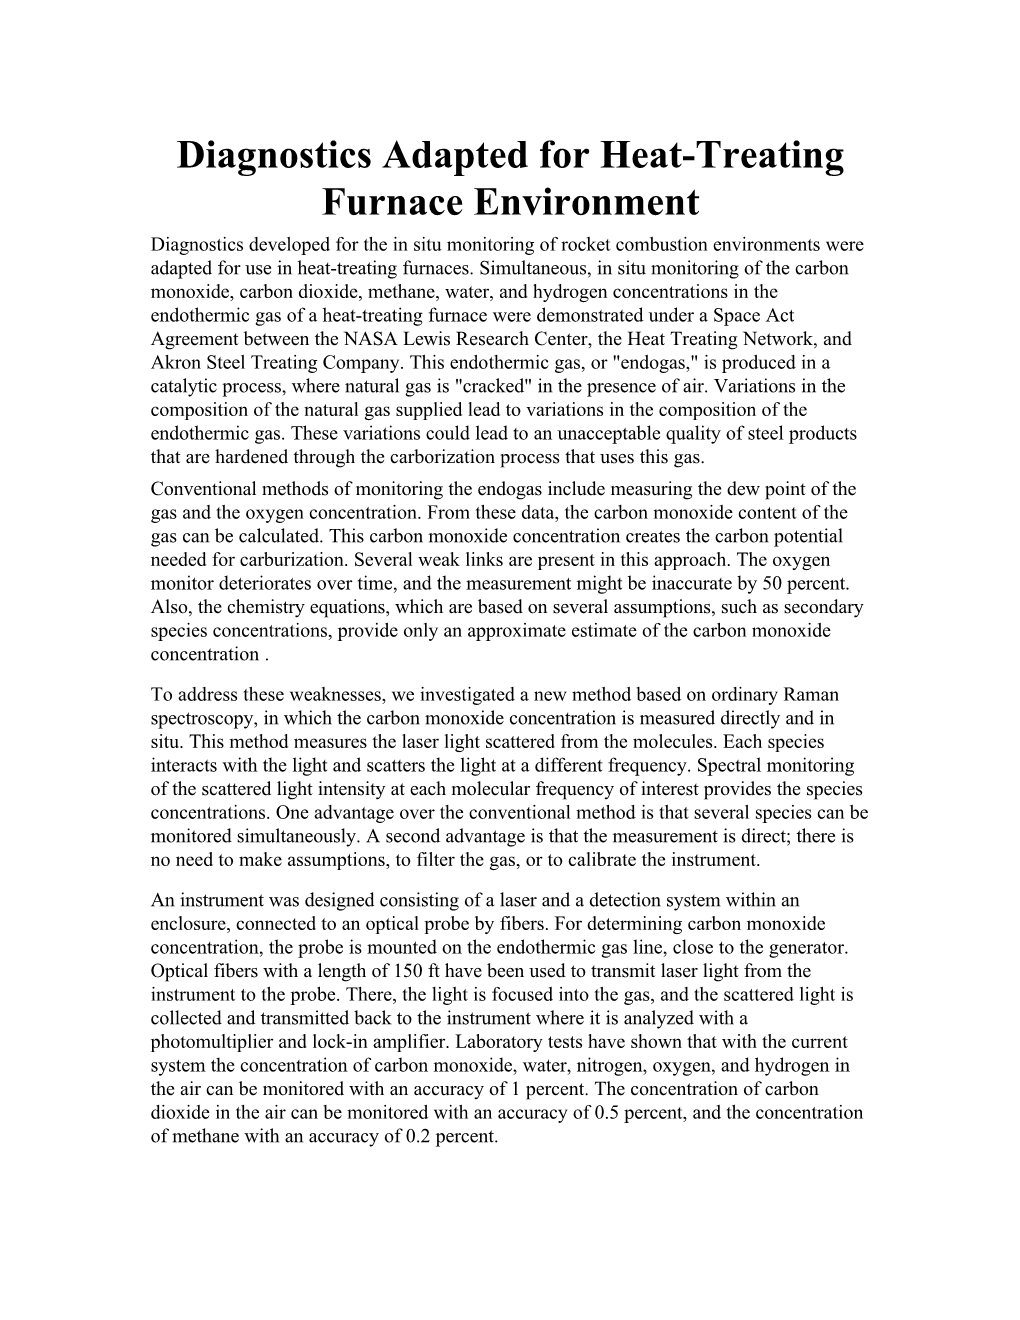 Diagnostics Adapted for Heat-Treating Furnace Environment